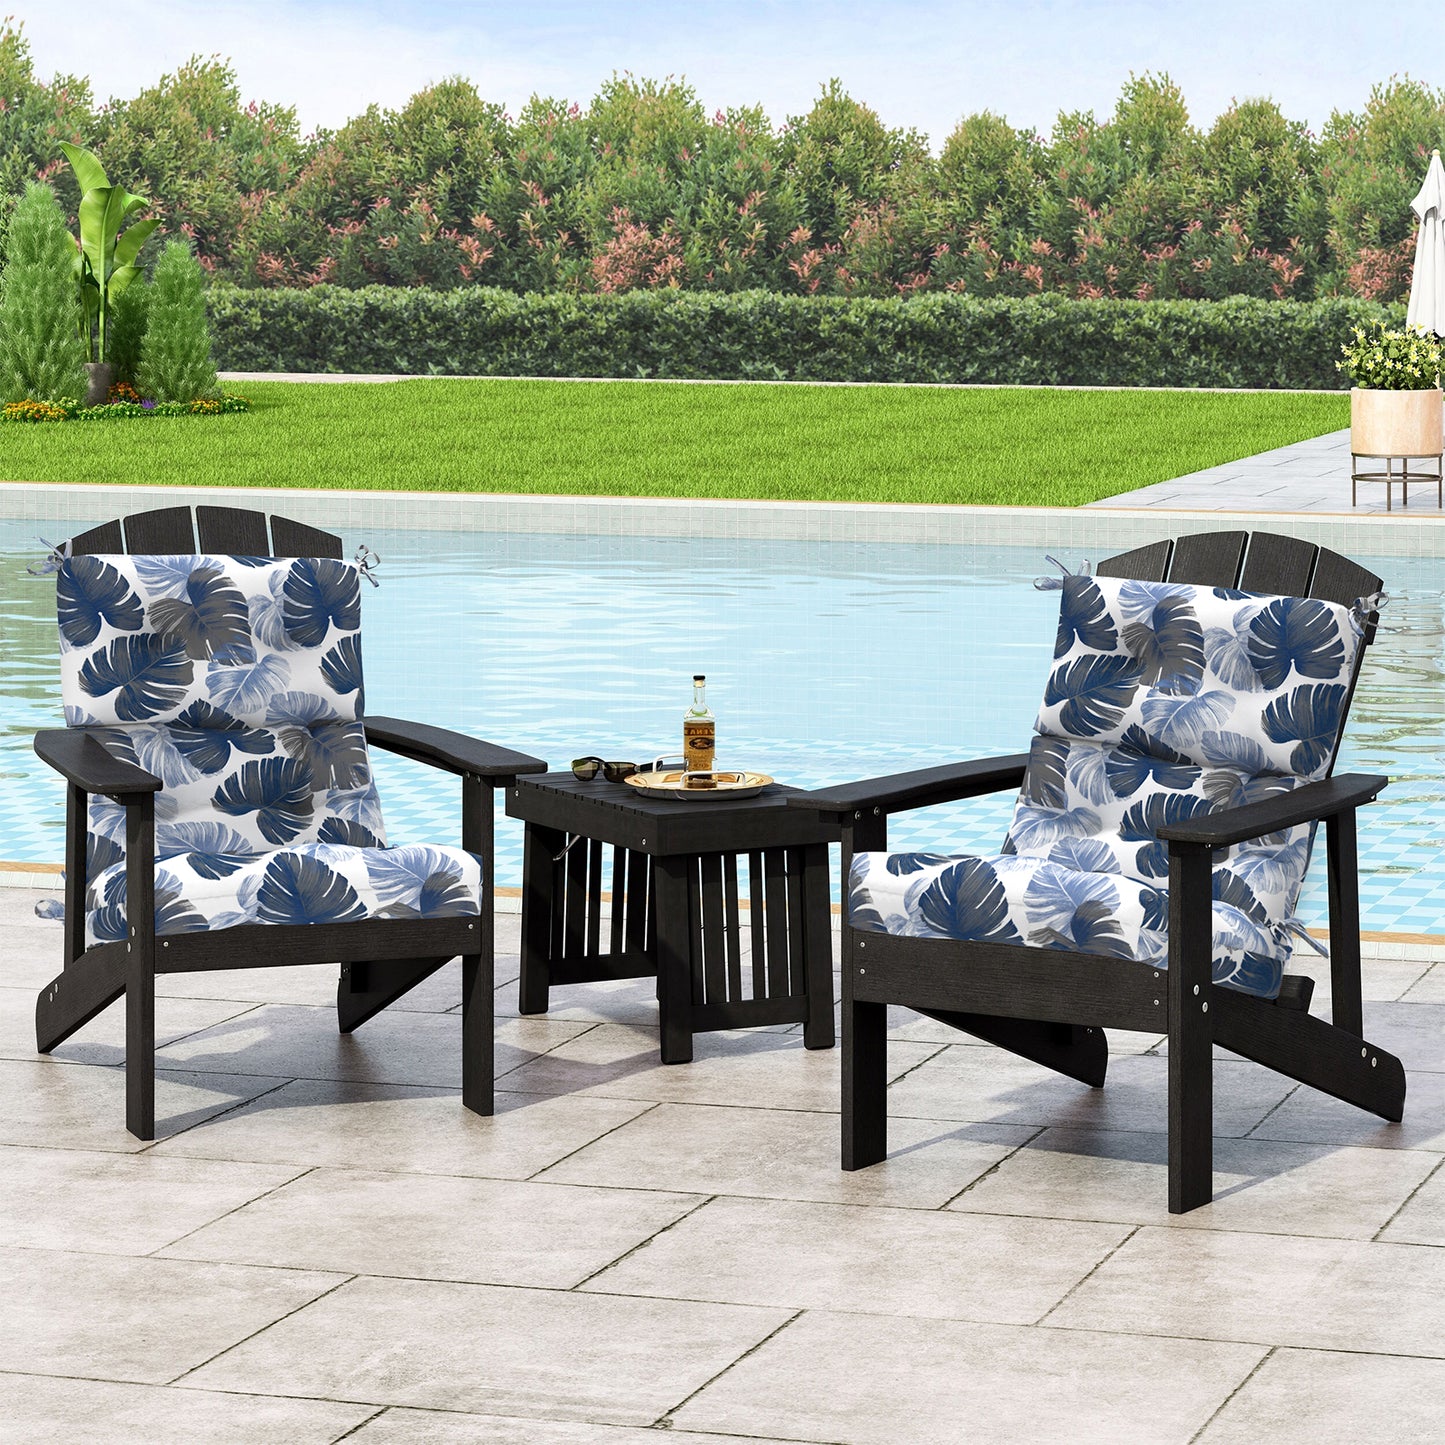 Melody Elephant Outdoor Tufted High Back Chair Cushions, Water Resistant Rocking Seat Chair Cushions 2 Pack, Adirondack Cushions for Patio Home Garden, 22" W x 20" D, Monstera Blue